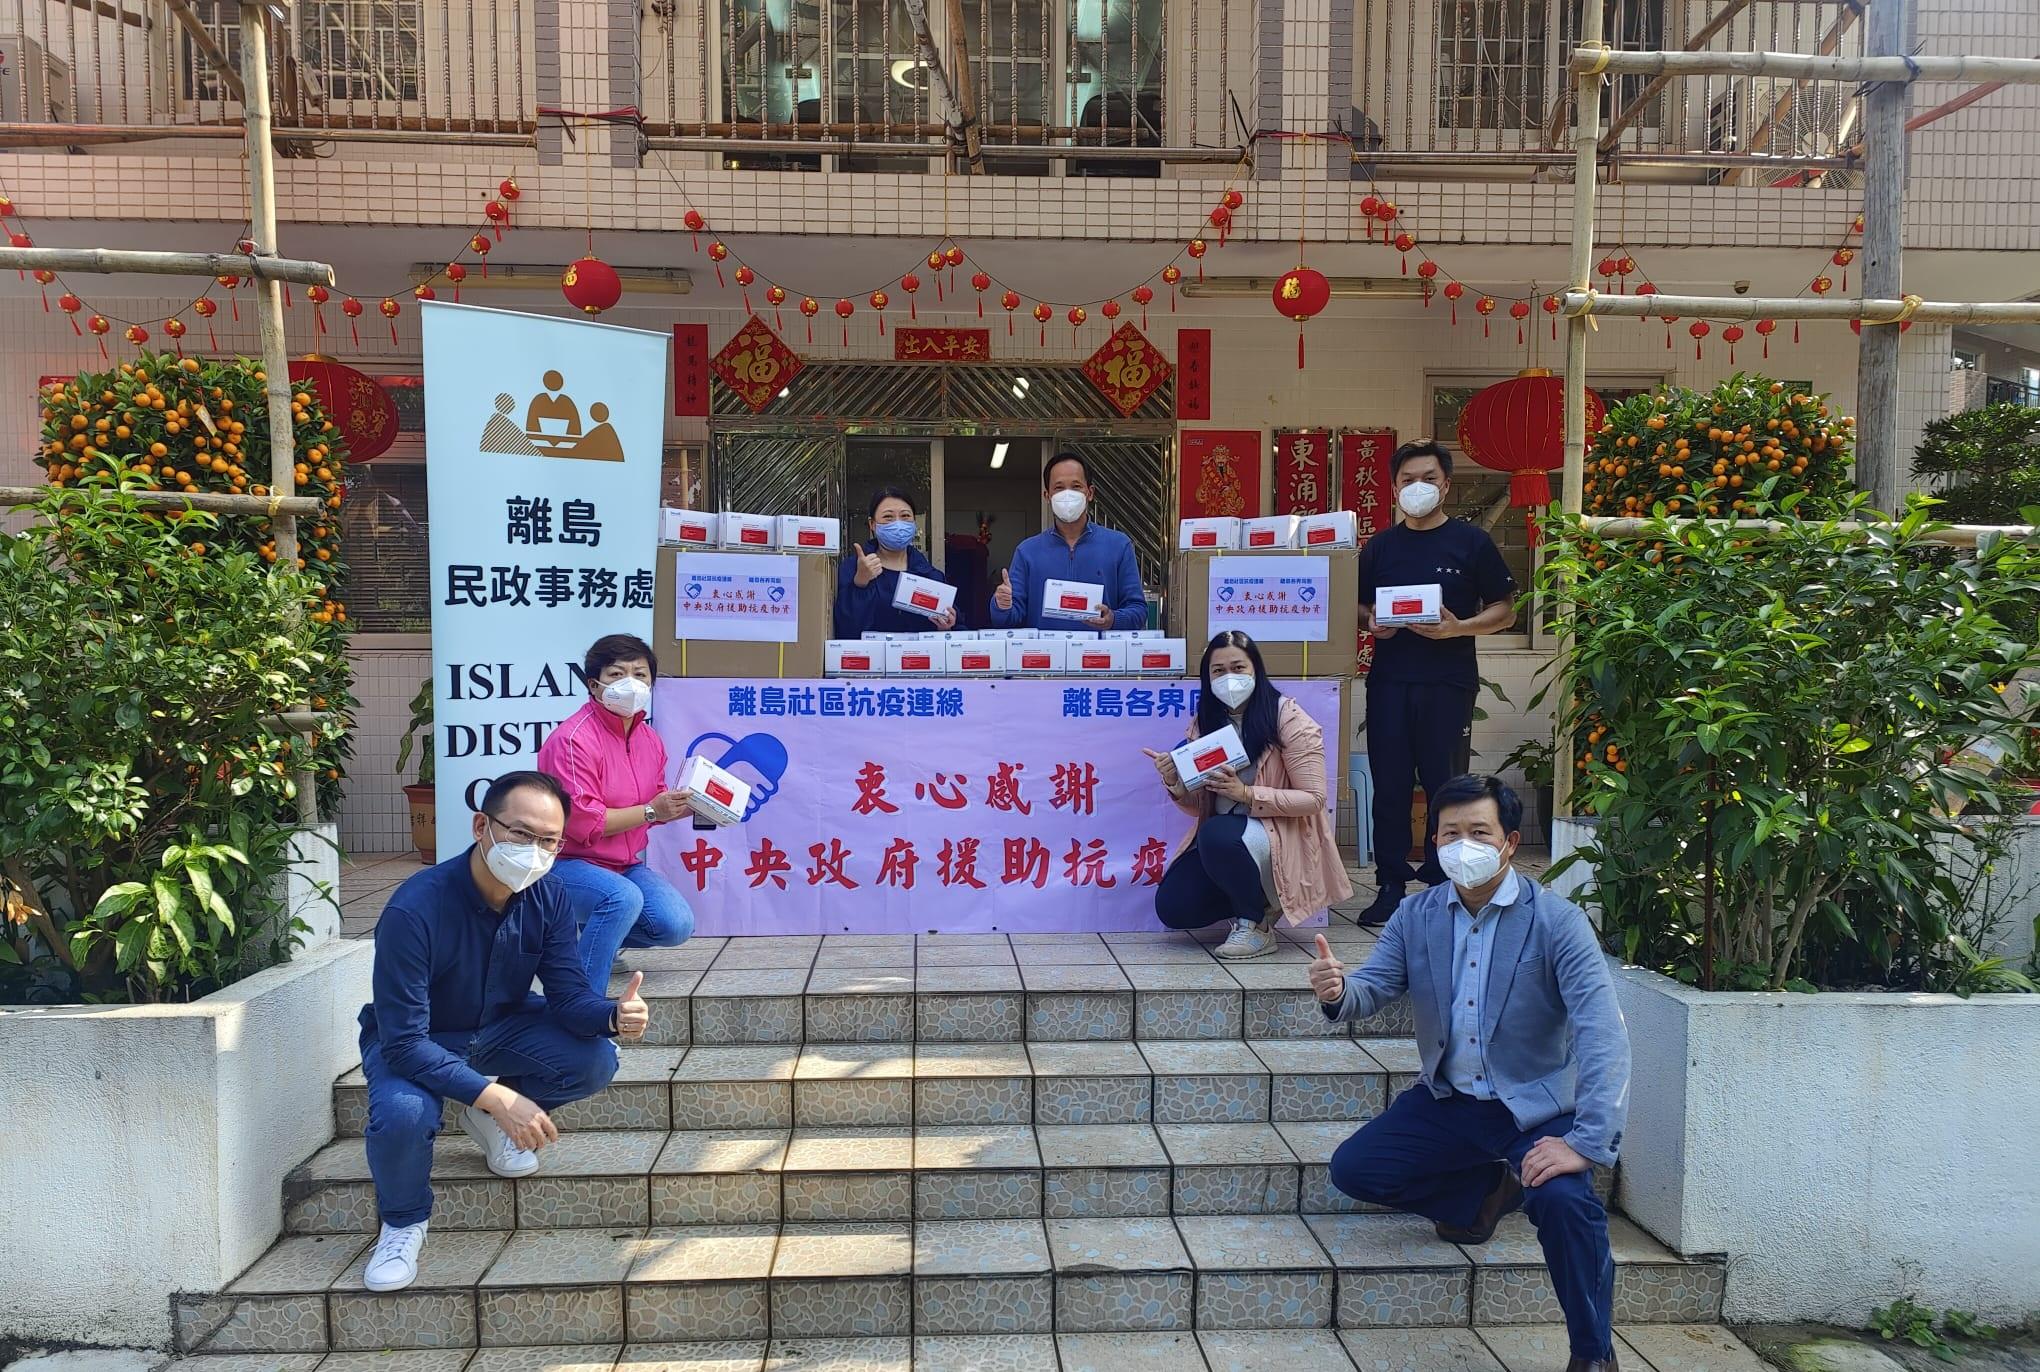 The Islands District Office, together with the Hong Kong Community Anti-Coronavirus Link, distributed rapid test kits through the property management companies, the Rural Committees and the residents' association, etc, to residents in the district on February 27.